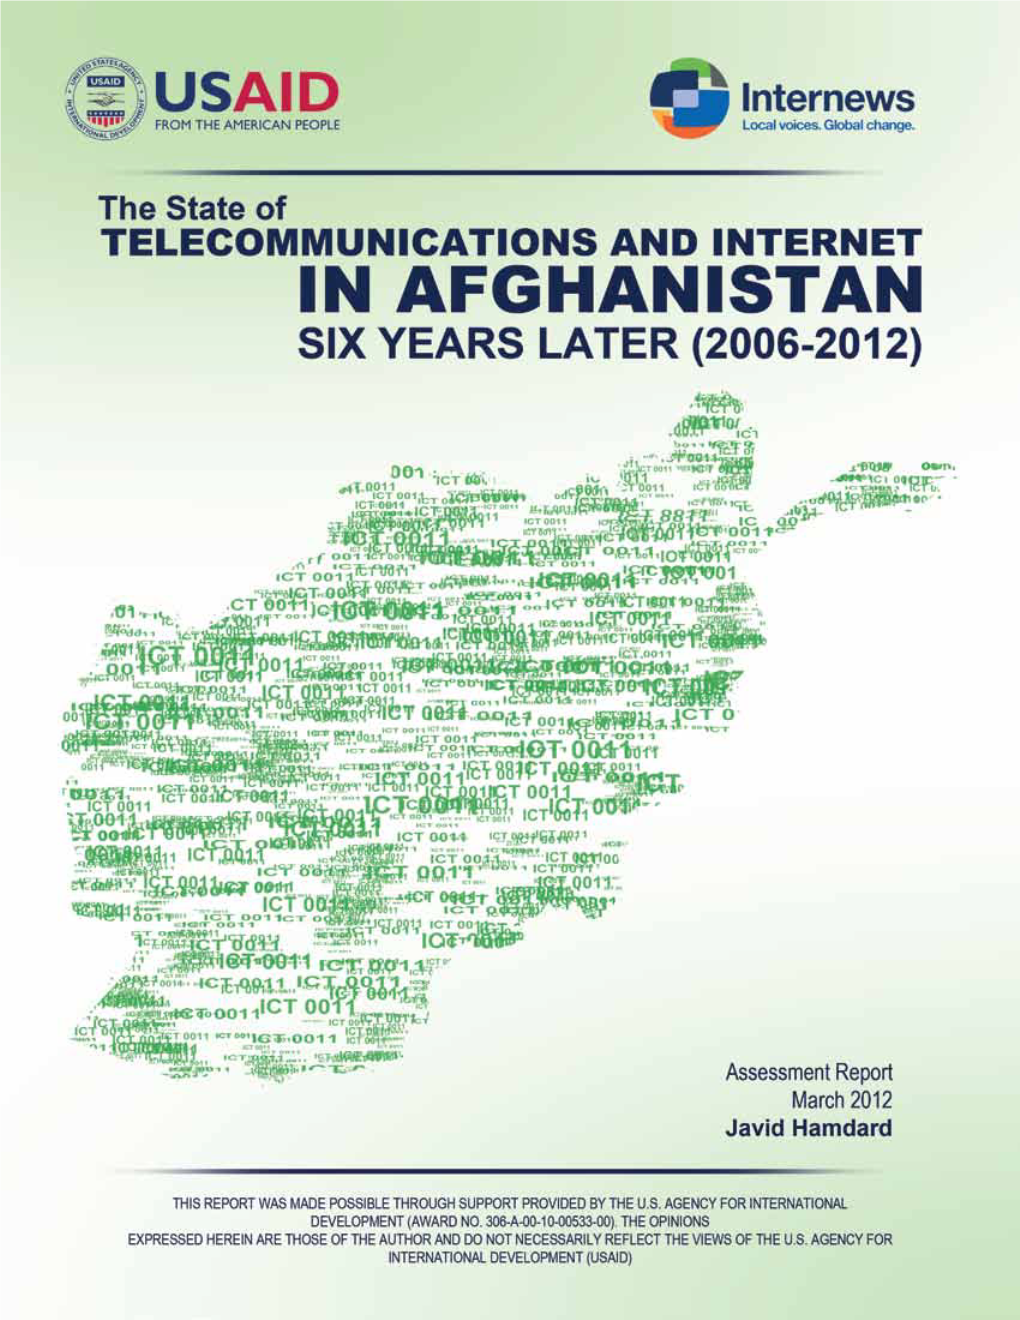 The State of Telecommunications and Internet in Afghanistan - Six Years Later (2006-2012) 4